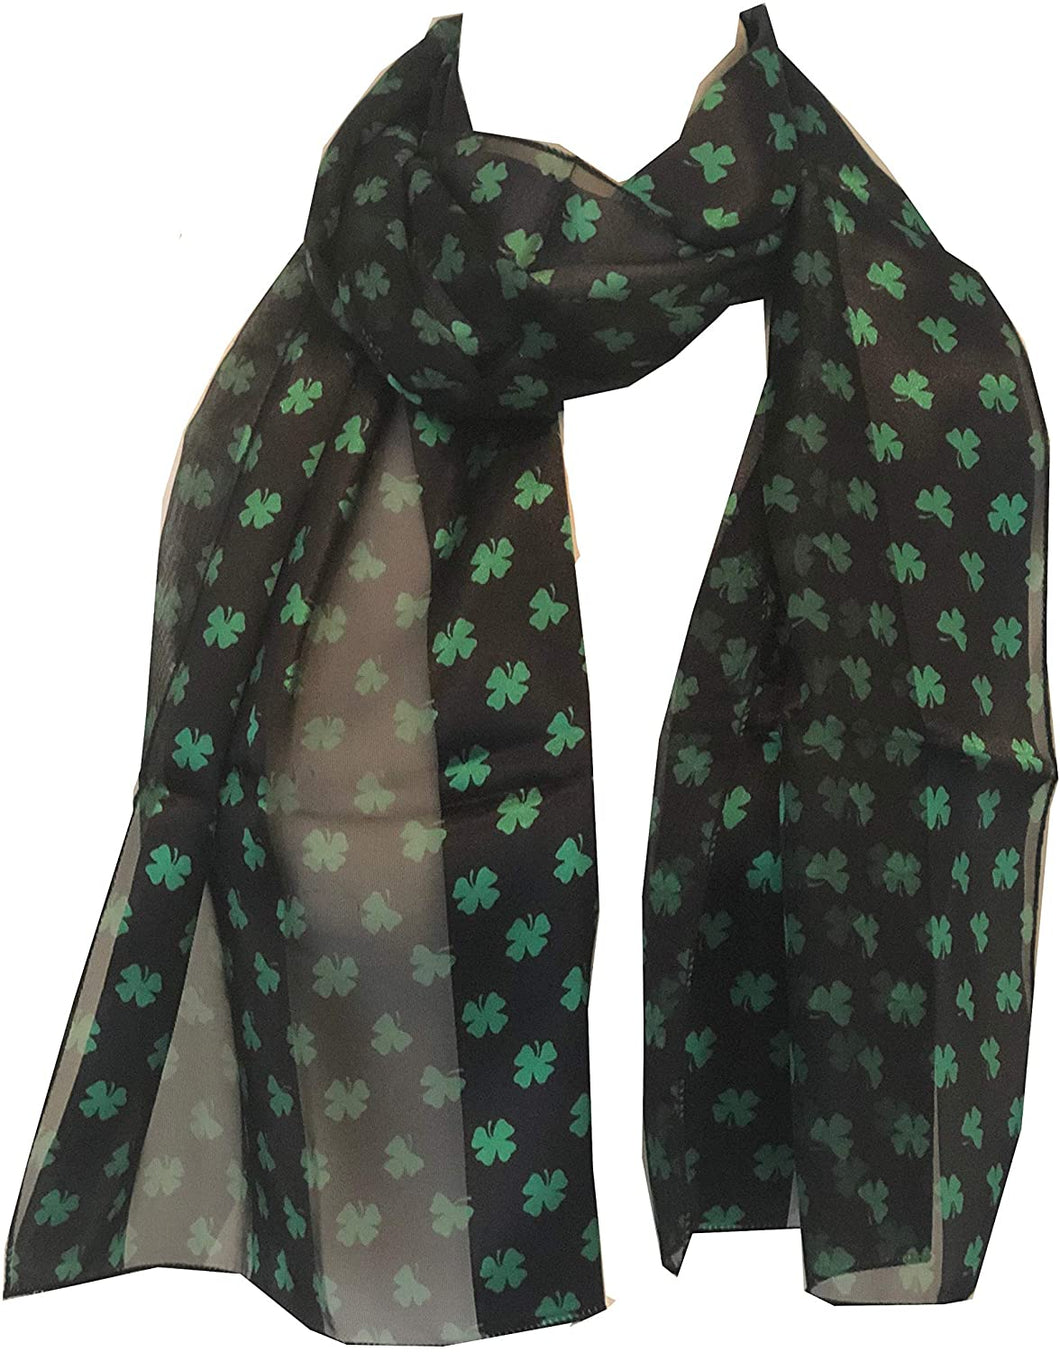 Pamper Yourself Now Black with Green Four Leaf Clover Scarf Thin Pretty Scarf